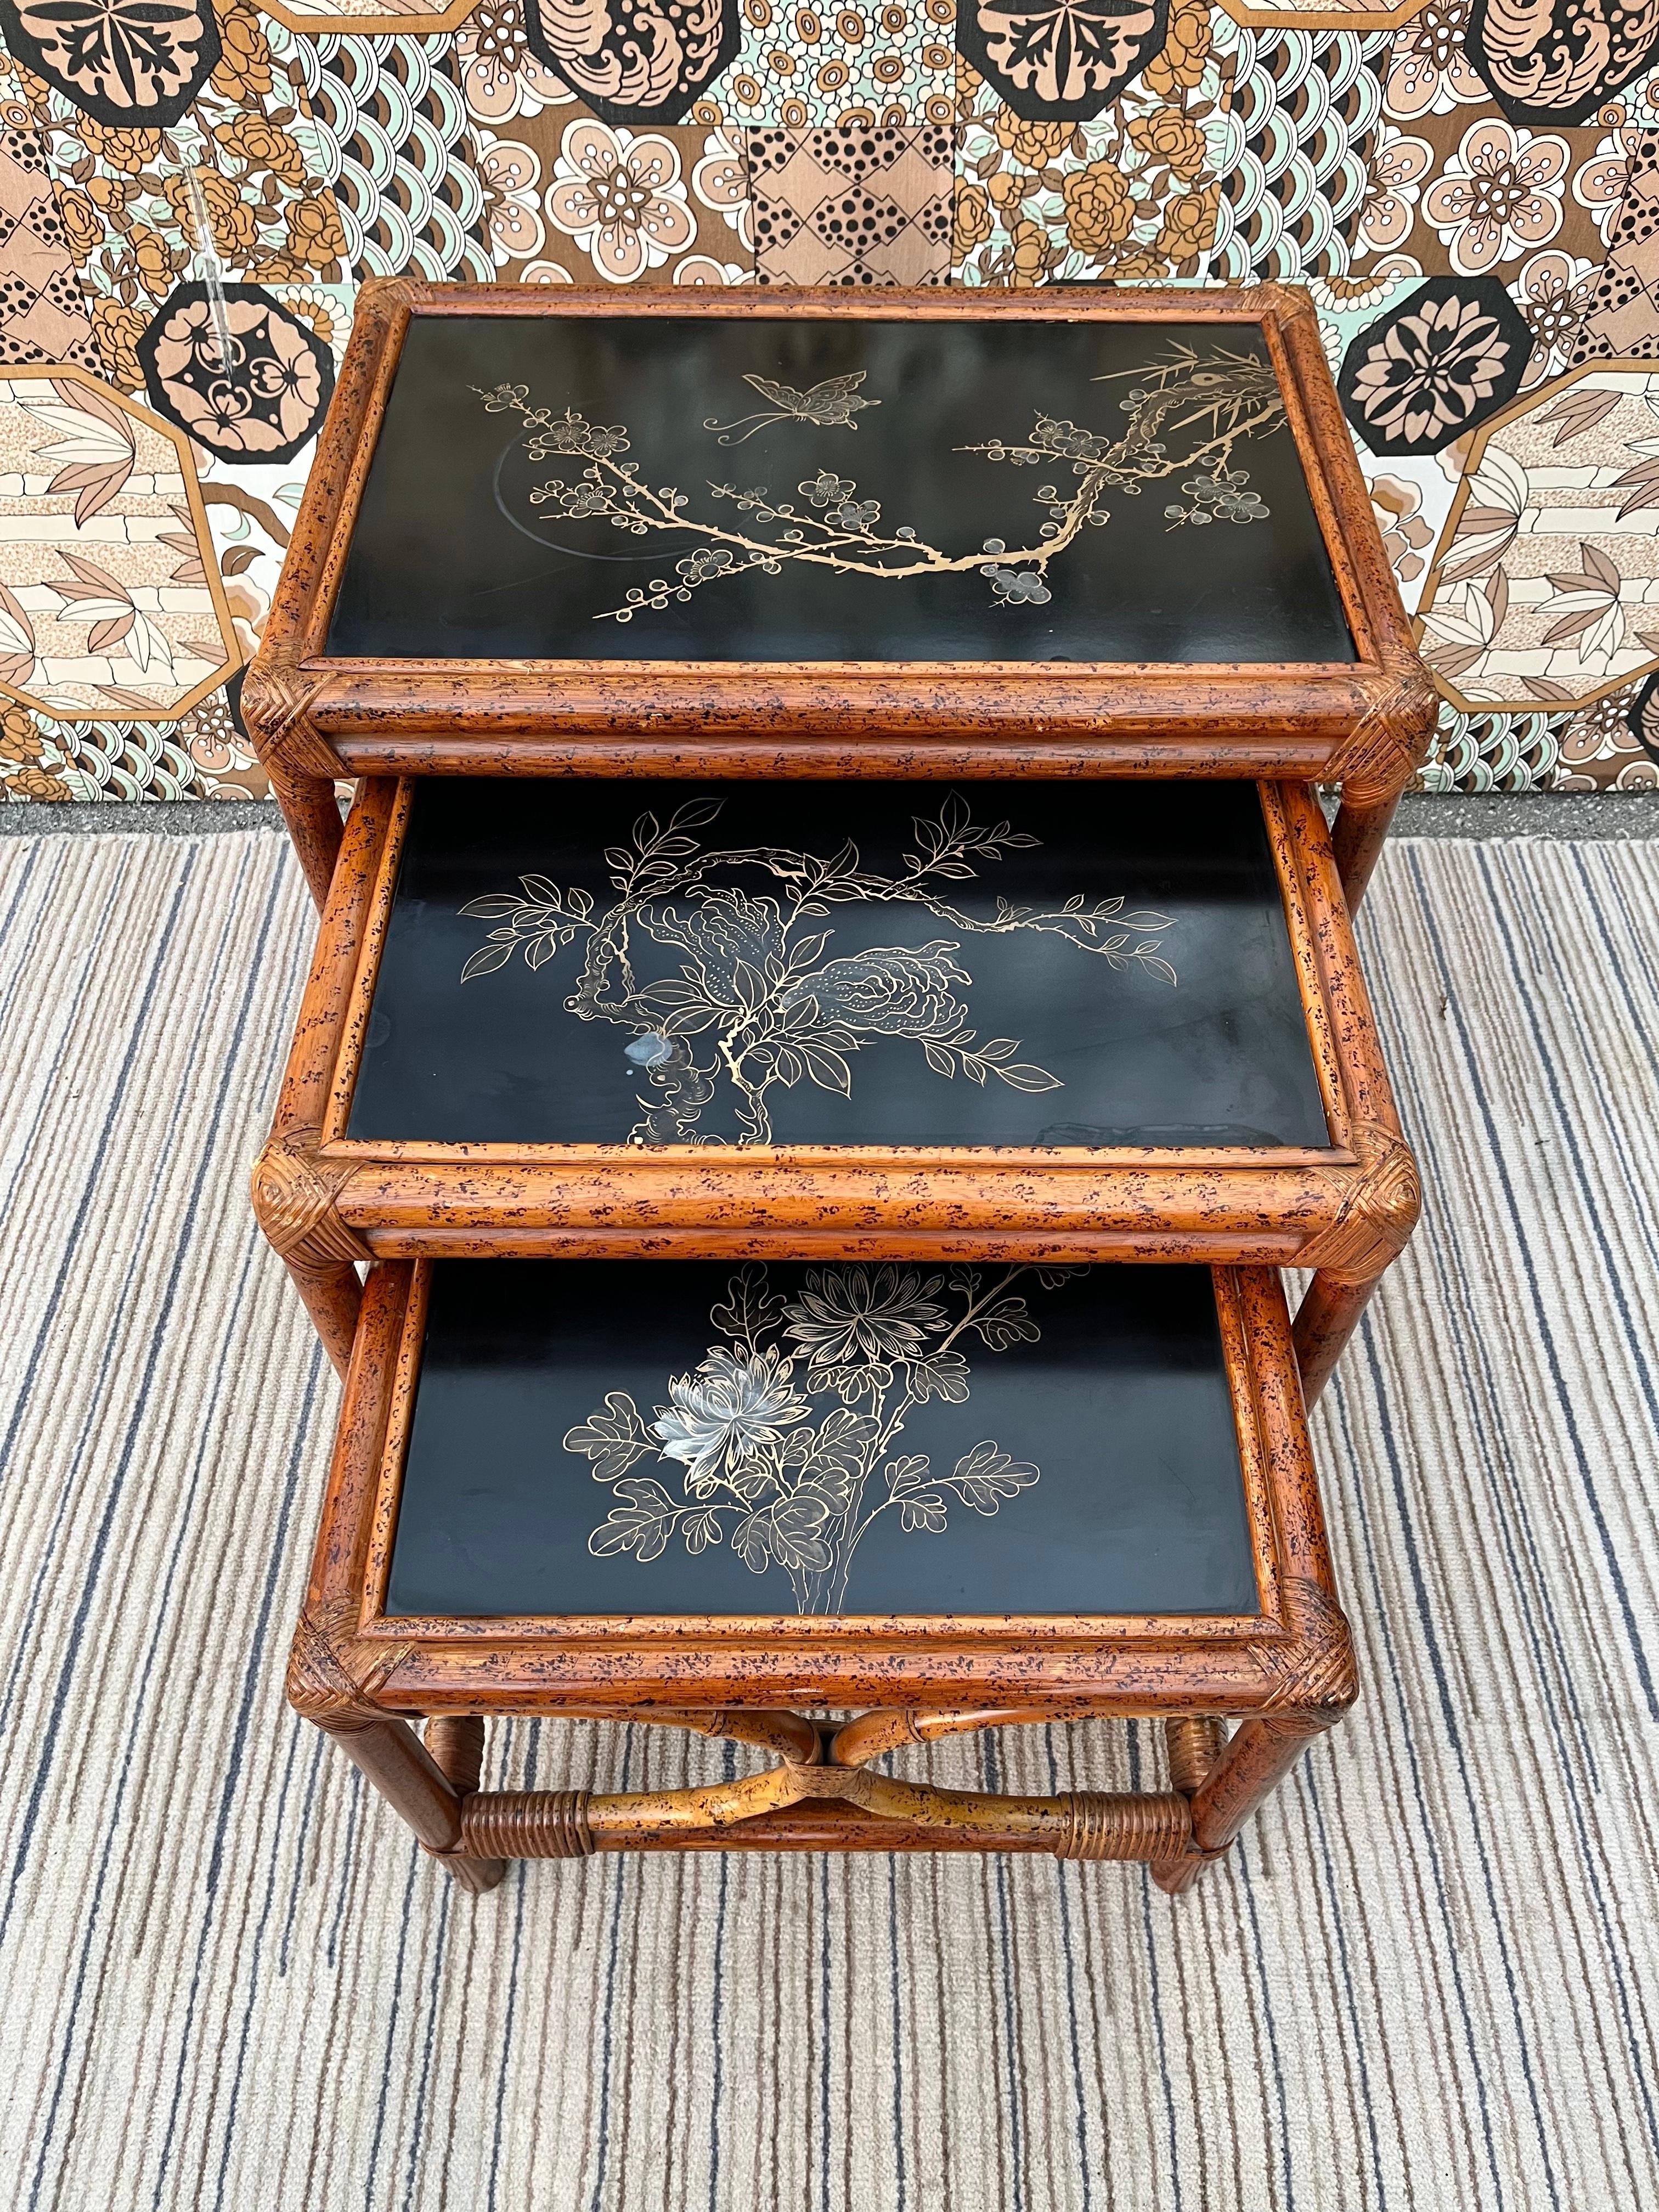 A set of three vintage chinoiserie Rattan nesting tables. circa 1960s.
Feature a tiger bamboo and rattan frame and black laminated top with floral motifs. 
In good original condition with normal signs of wear consistent with age and history. There